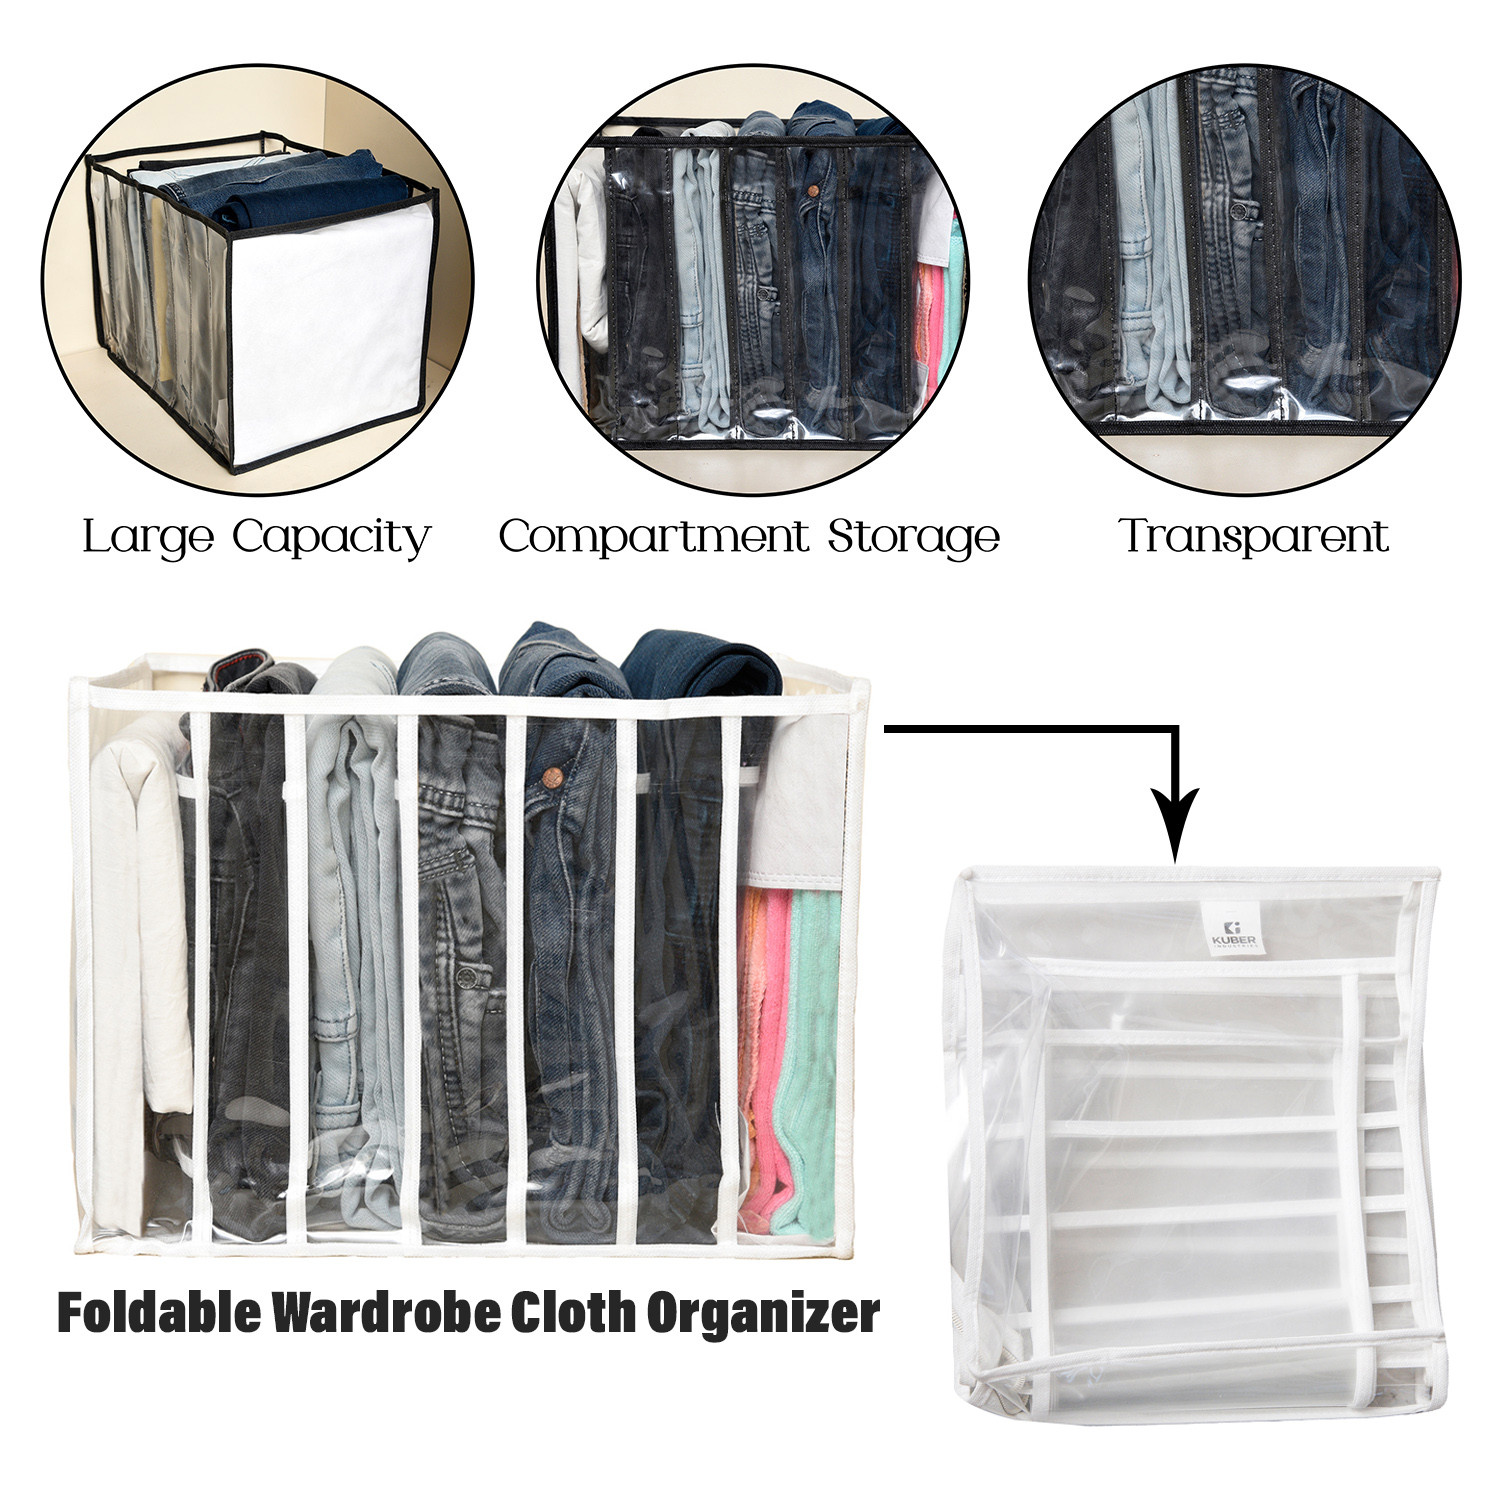 Kuber Industries Wardrobe Cloth Organizer | PVC .40mm Drawer Organizer | 7 Grids Foldable | Clear Transparent for T-shirts | Trousers | Socks | White